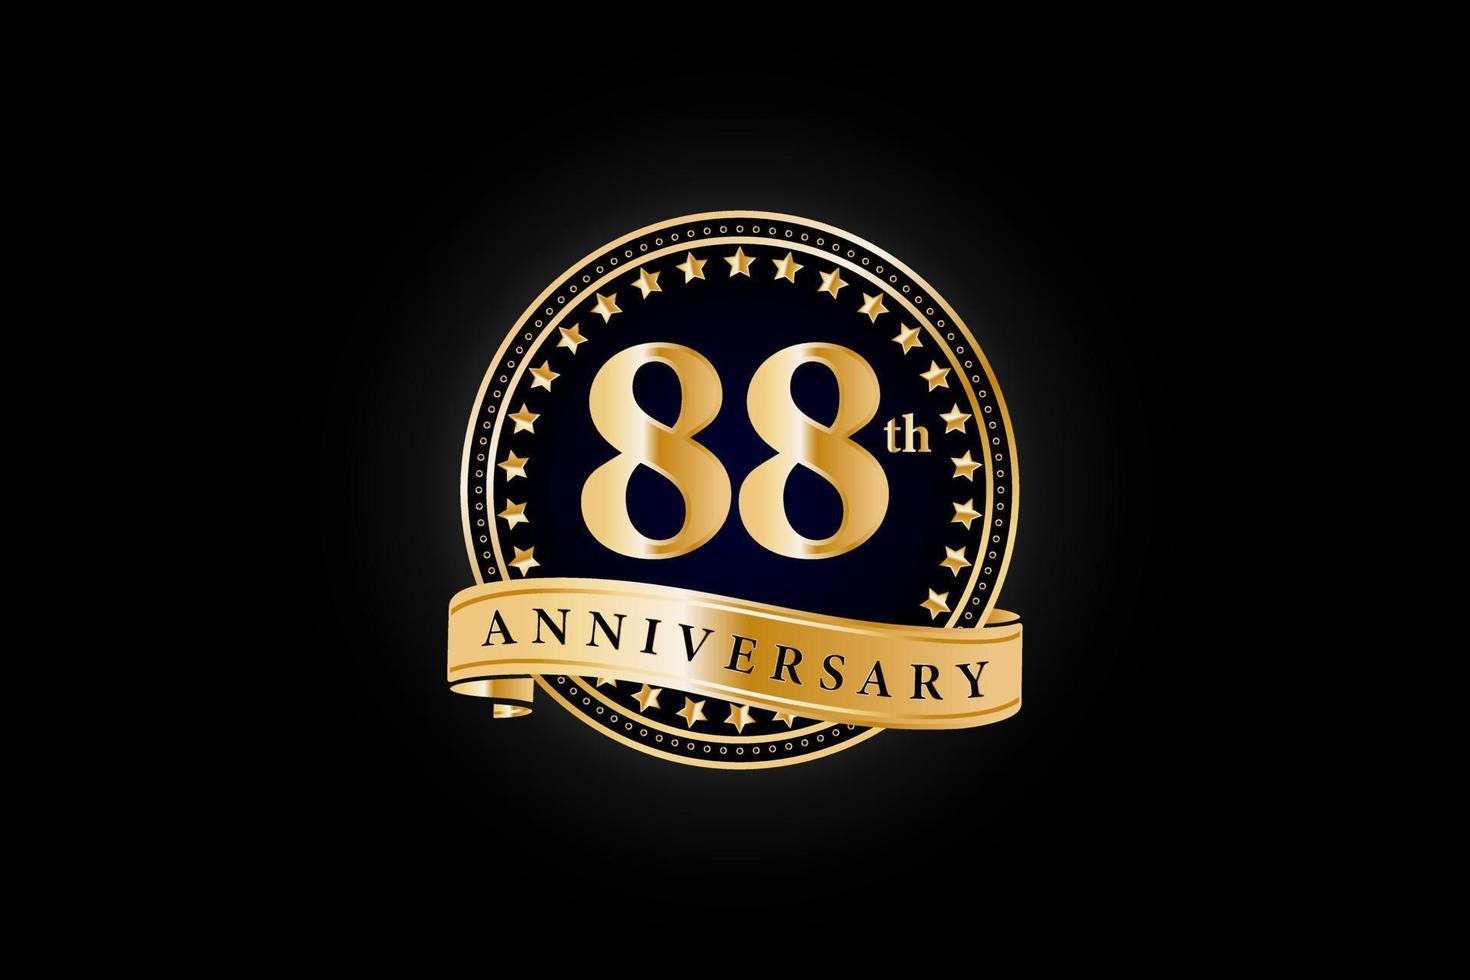 88th Anniversary golden gold logo with ring and gold ribbon isolated on black background, vector design for celebration.